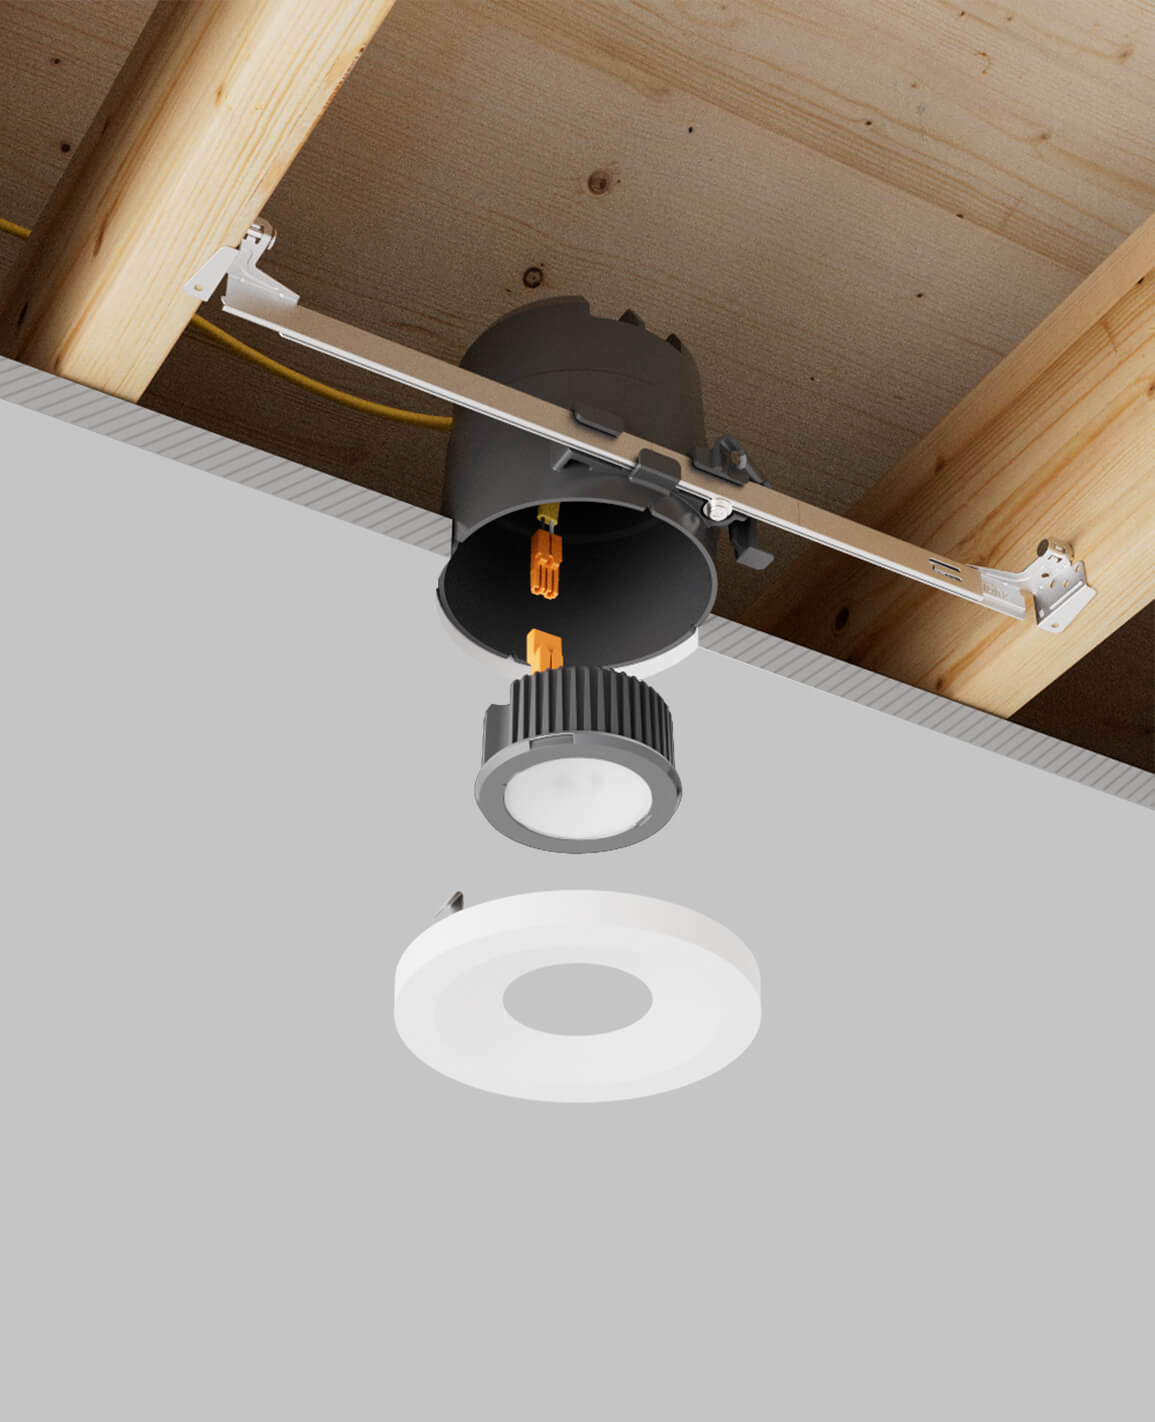 LUSA 4" recessed light with bar hangers housing and white surface trim